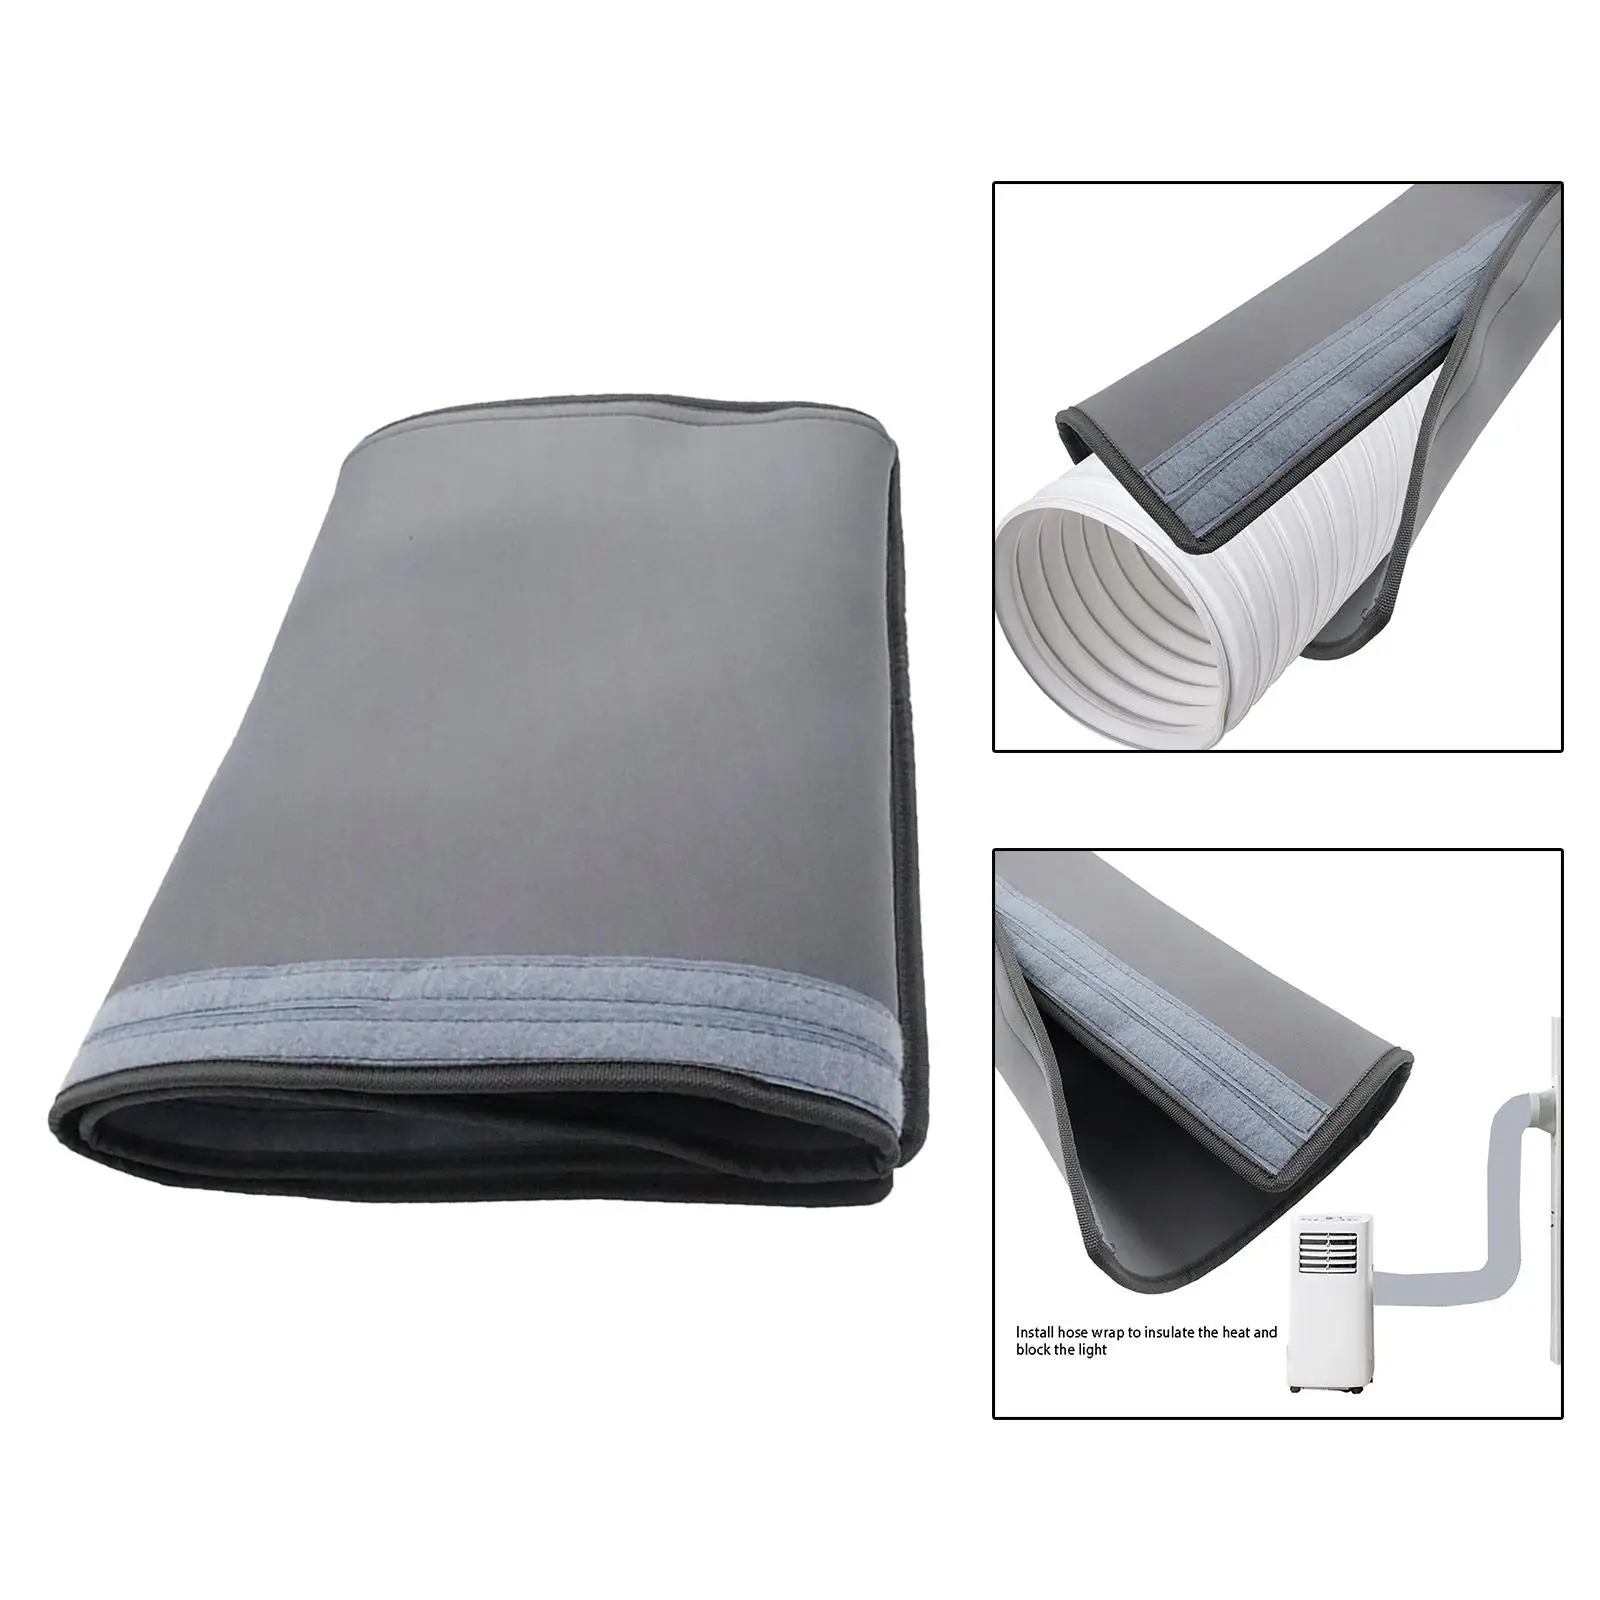 Portable Air Conditioner Hose Wrap Cover Dust Proof Protection Home Bedroom